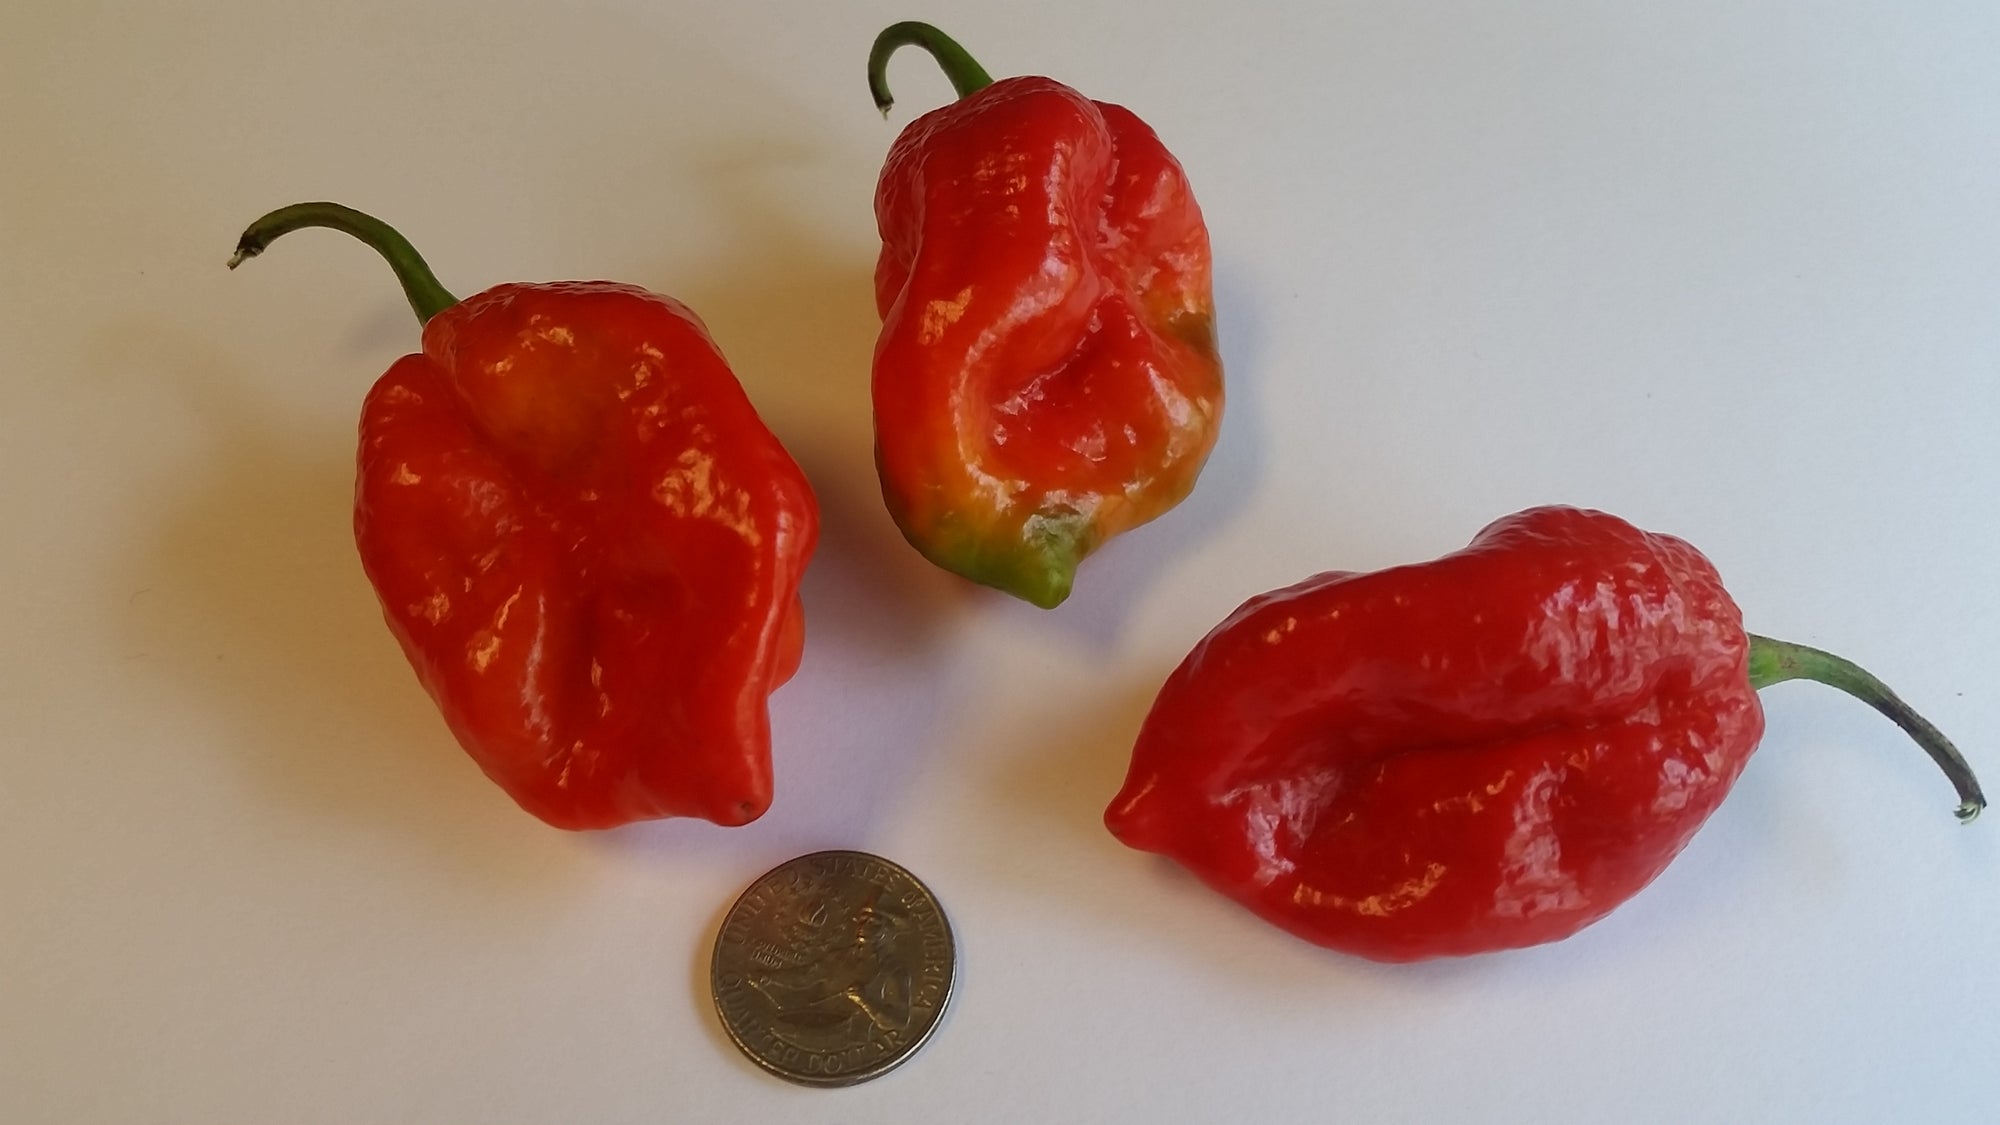 Large Red 7 POD - Seeds - Bohica Pepper Hut 